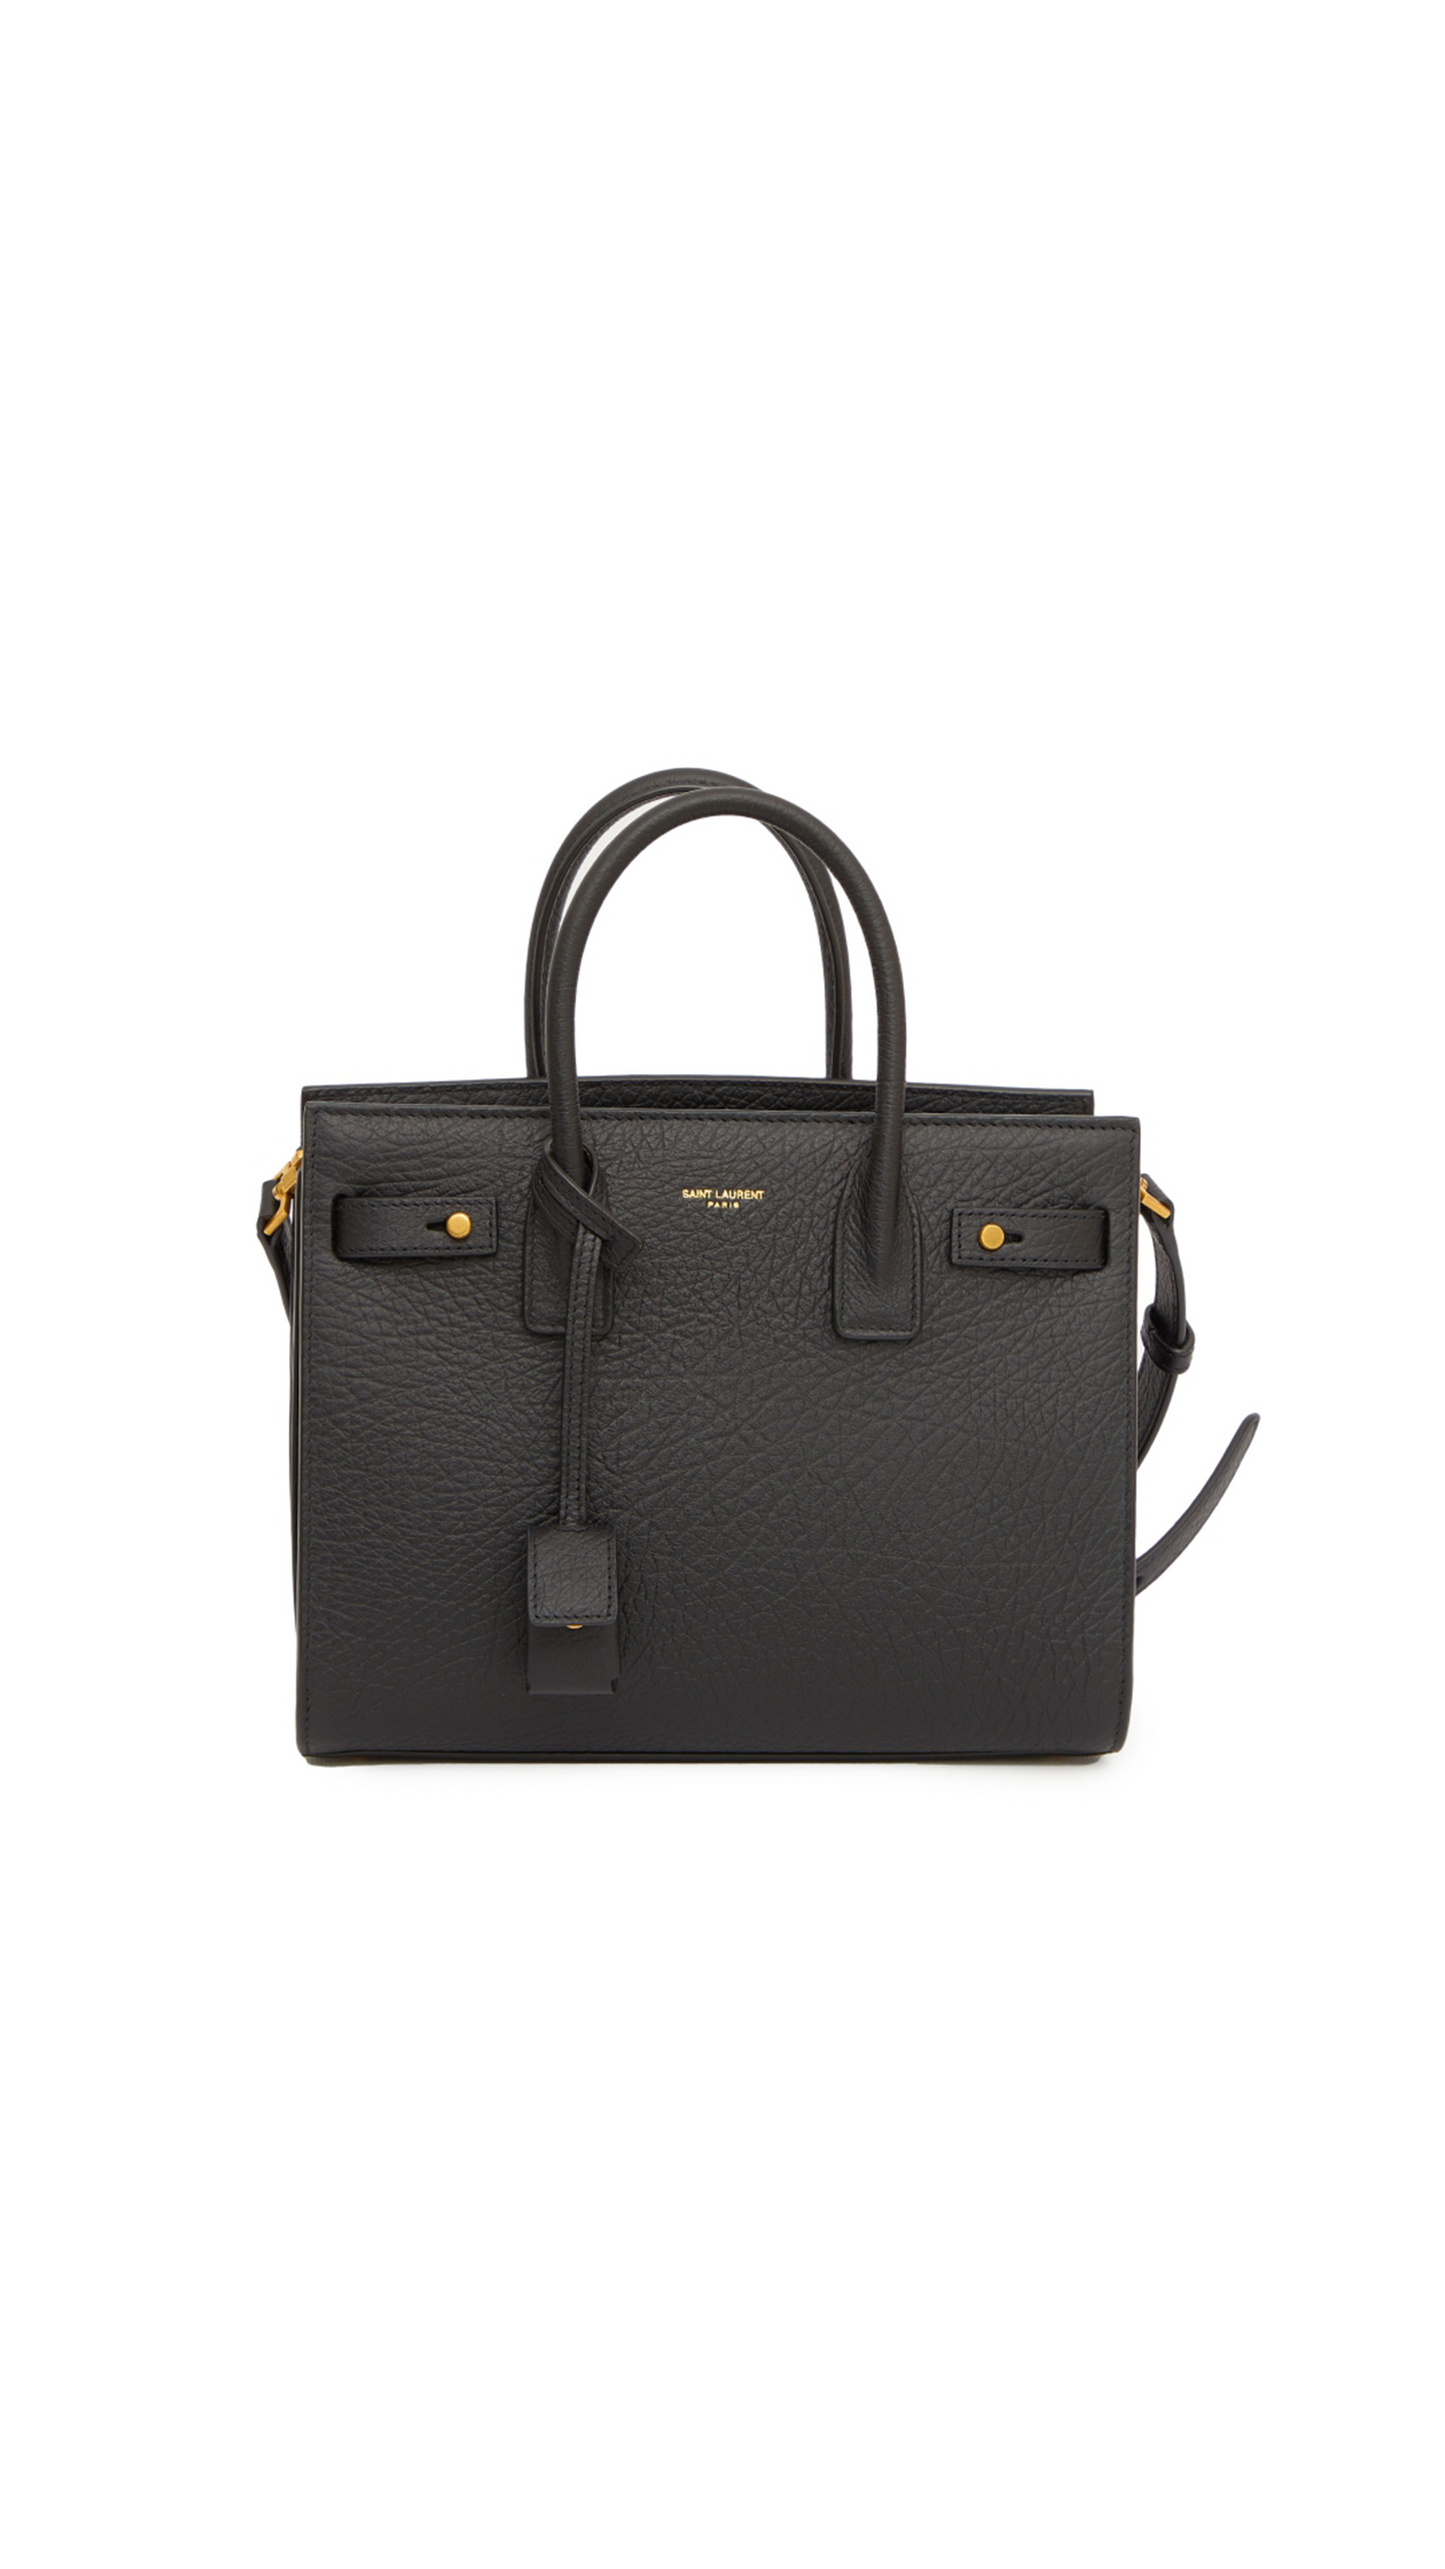 Sac De Jour Baby in Grained Leather - Black